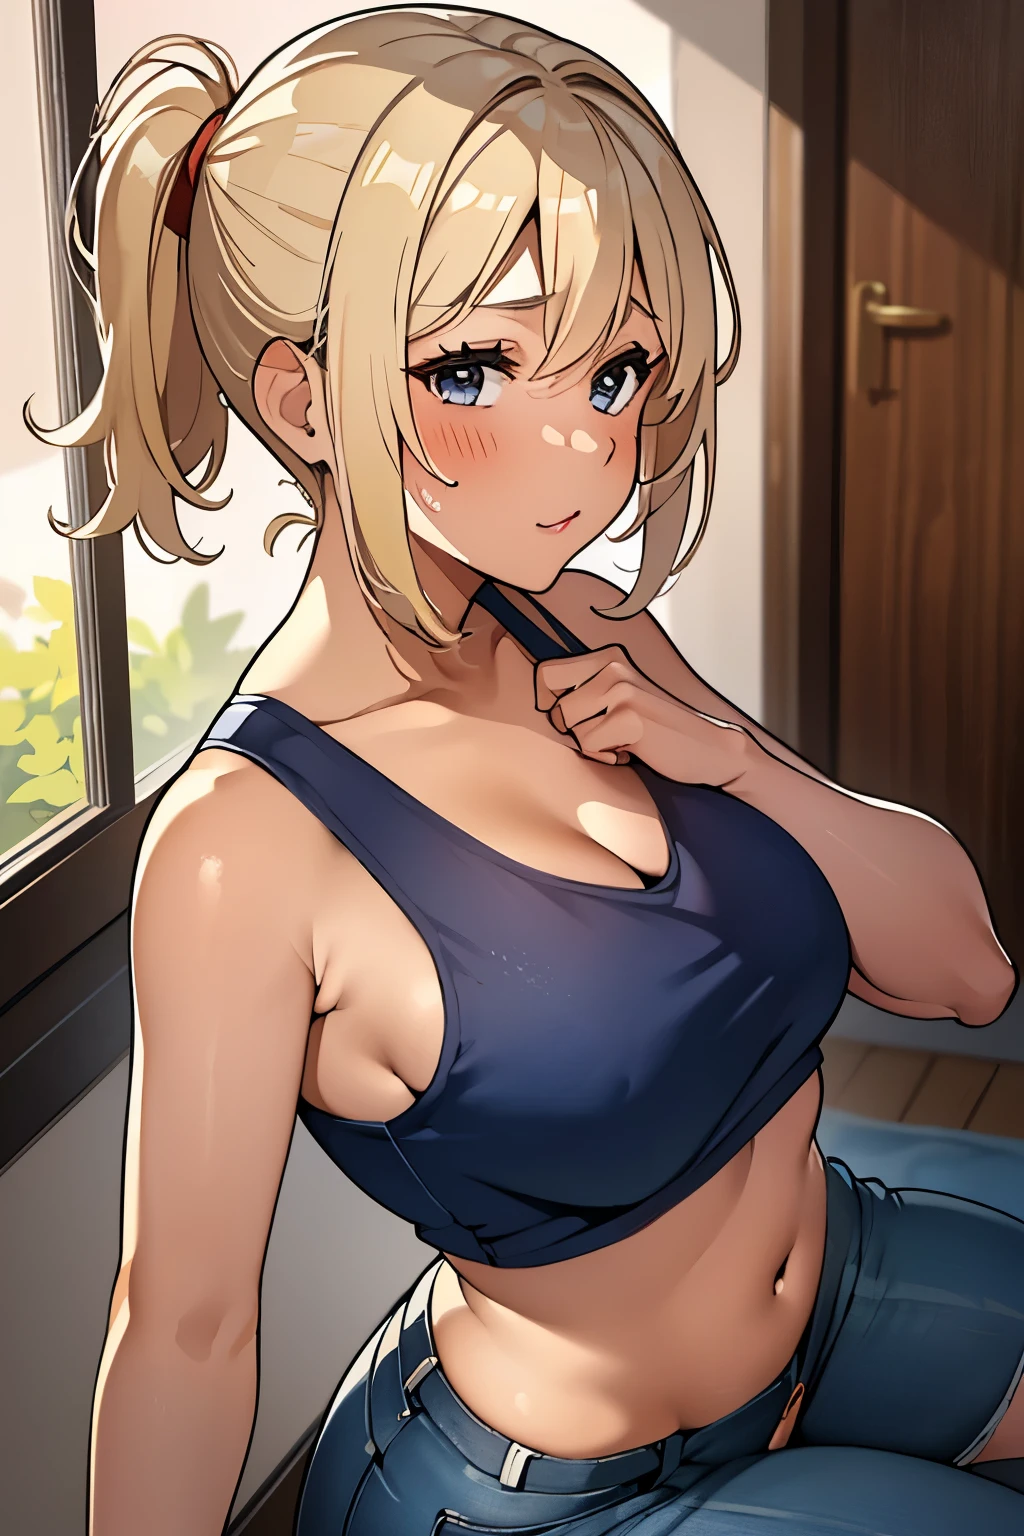 Mature Japanese Woman、short hair、ponytail、(((bright blonde:1.2)))、(((gal)))、Blonde gal、tanned skin、(((big breasts:1.1)))、sexly、Red cheeks、(((nsfw)))、big breastsが見える、Cleavage is separated、(((masturbation)))、(((sex)))、sweaty、(((Pussy)))、(((pubic hair)))、(((Tank top&jeans)))、love hotel、40 years old、mature woman、Married woman、wedding ring、(((Point your ass towards the screen)))